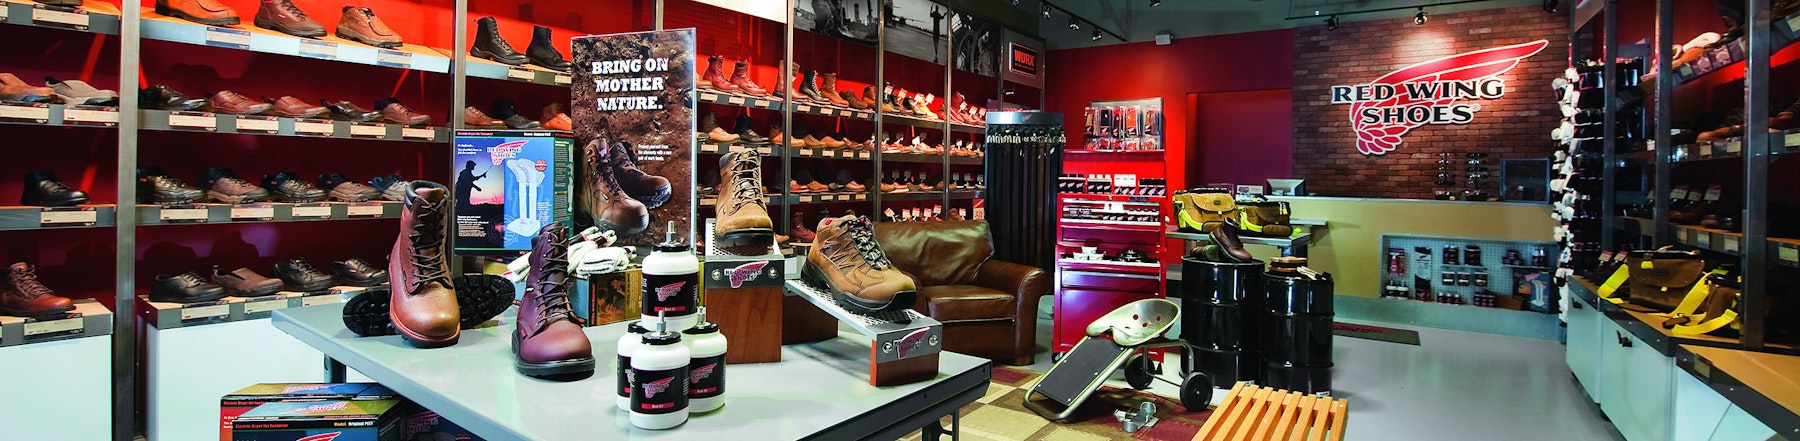 The Red Wing Shoes brand design retail space showing Red Wing Shoes logo.